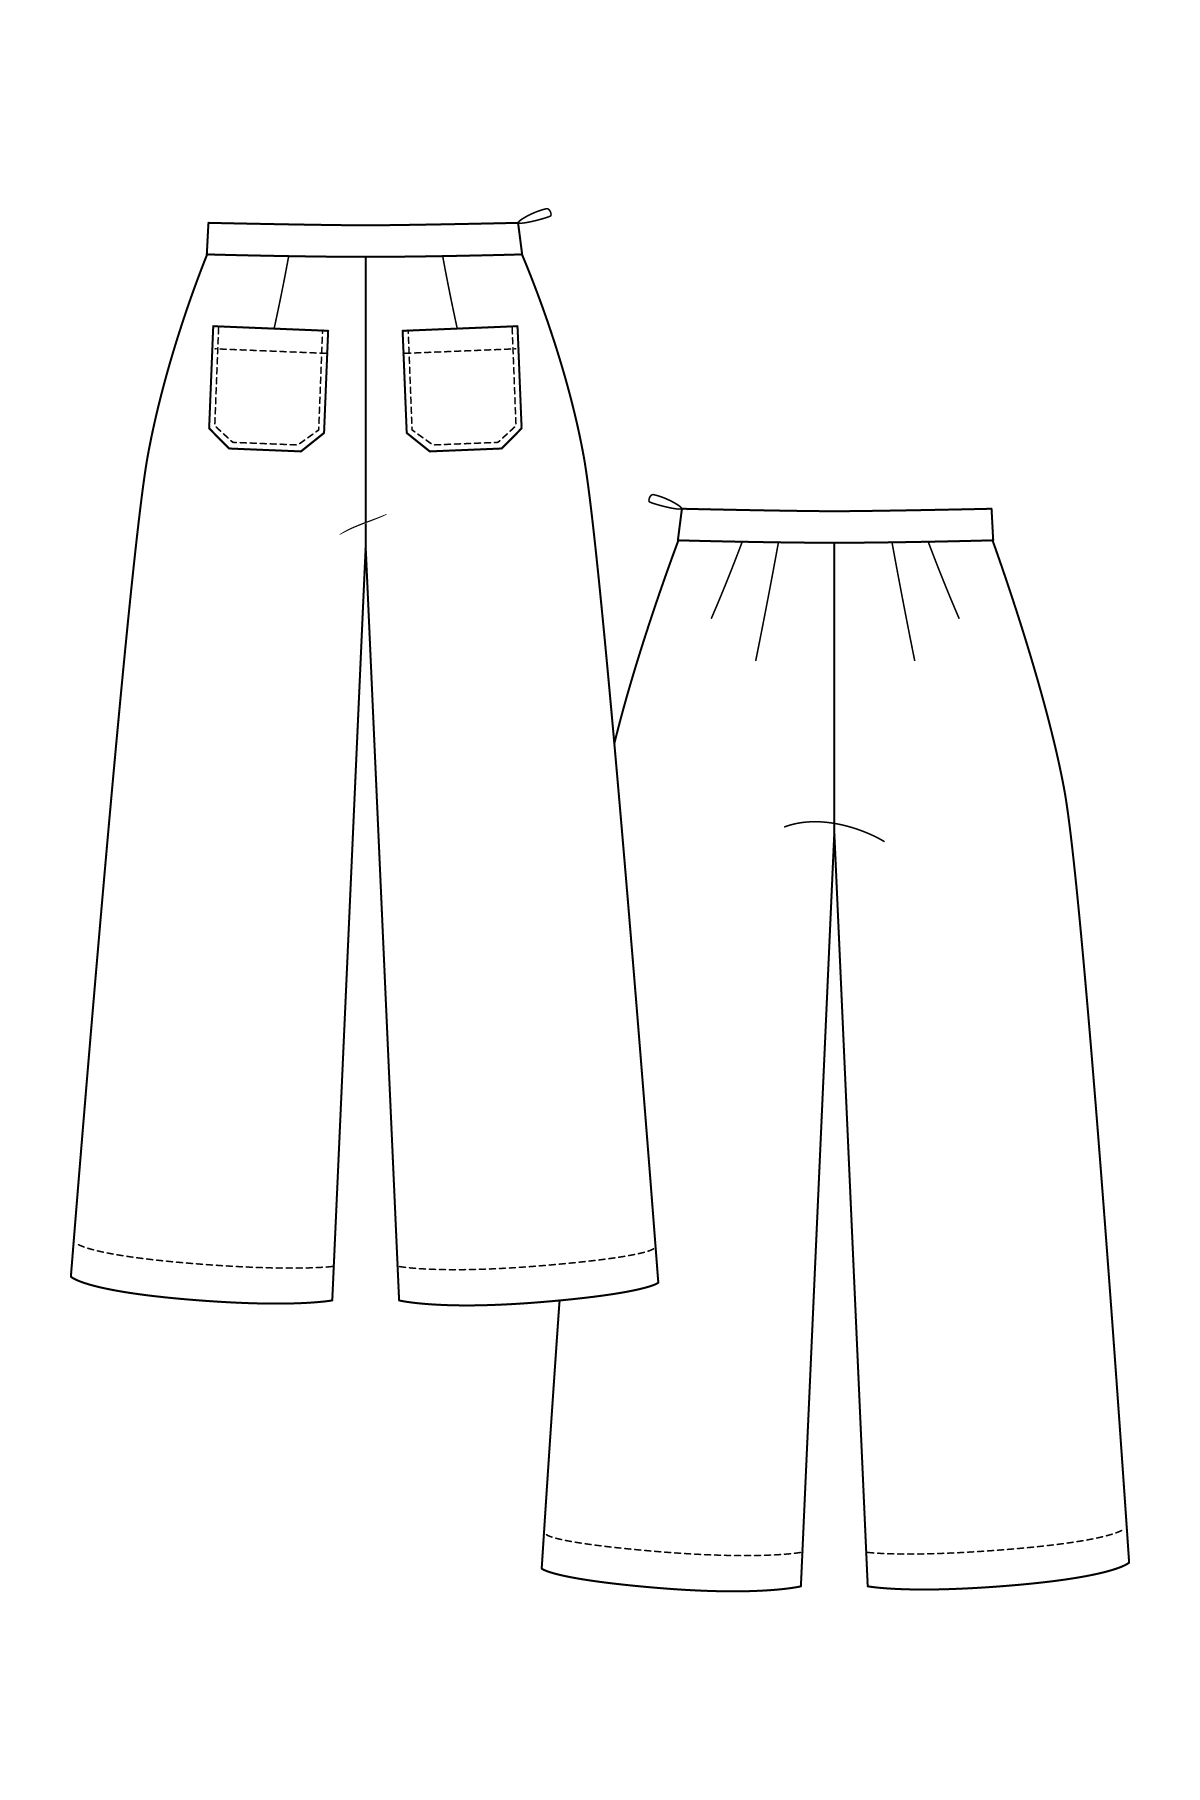 versotrousers-linedrawing.png